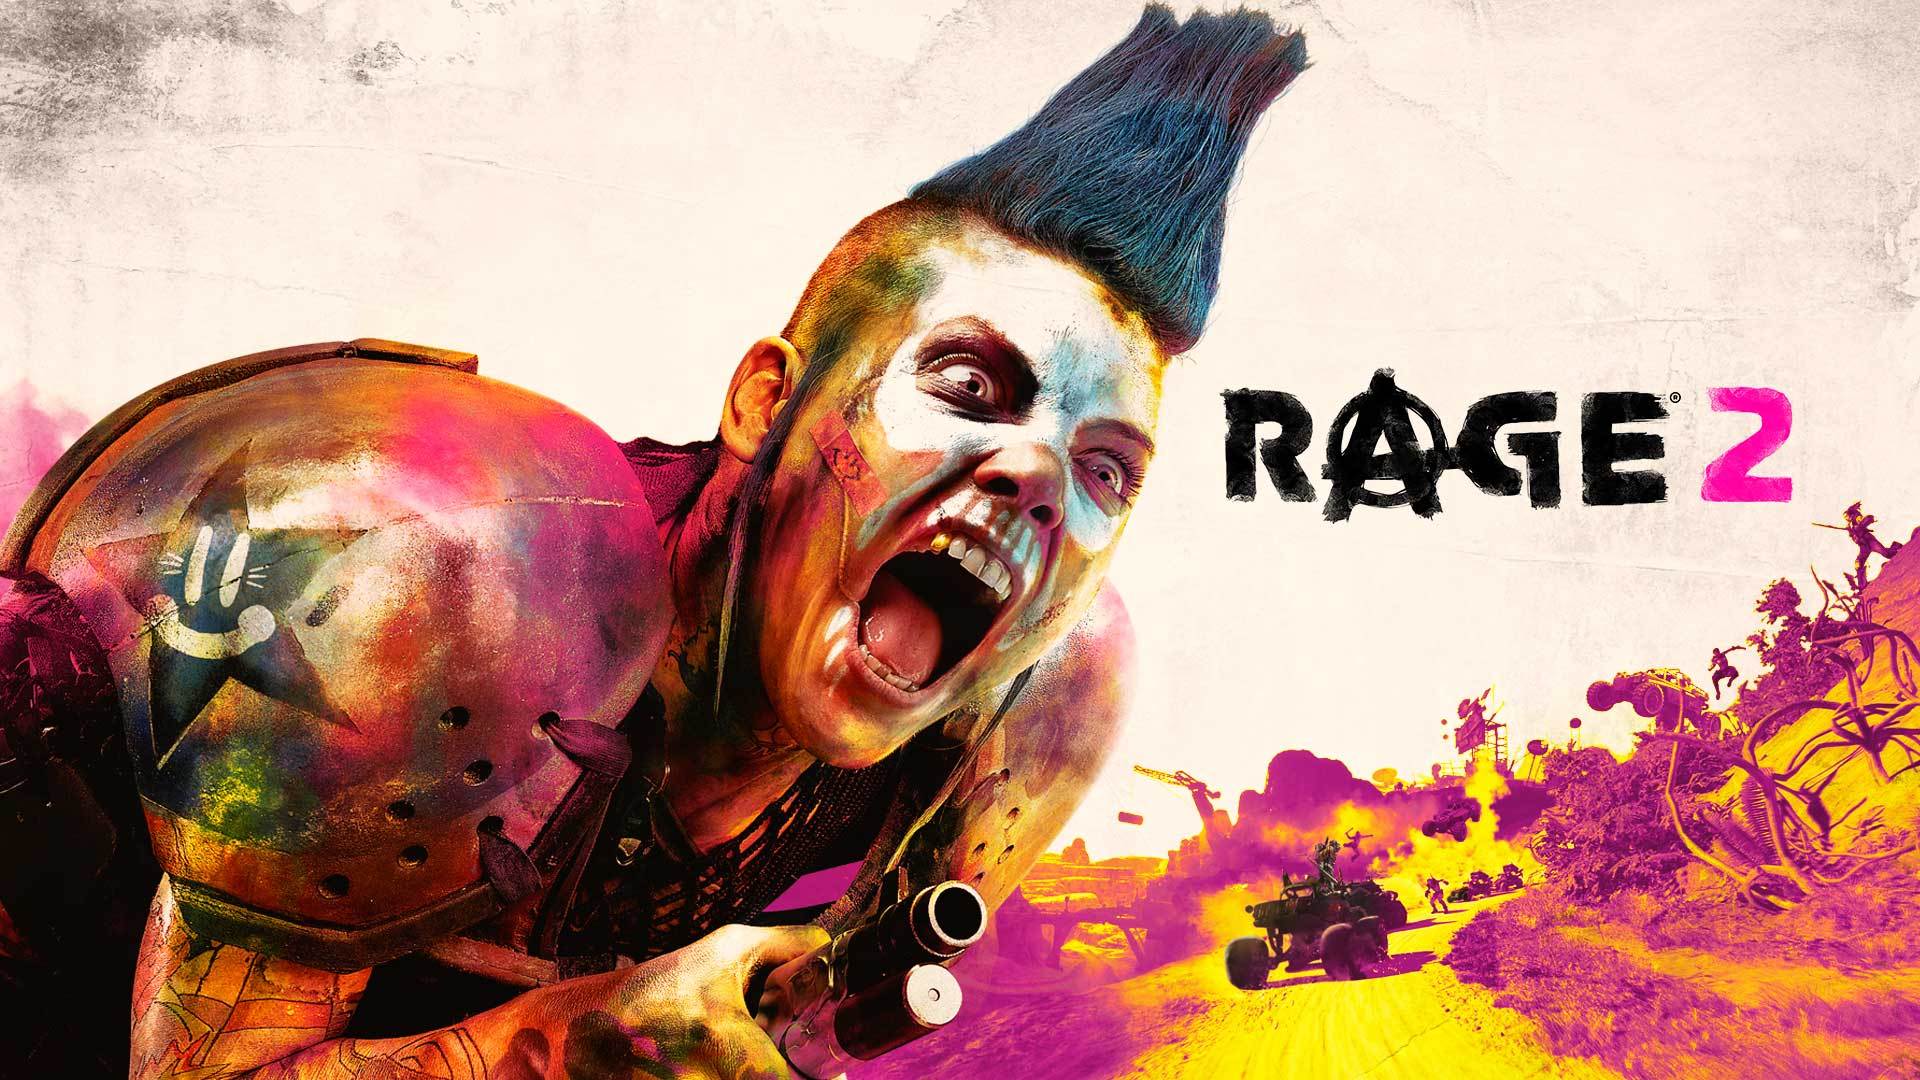 Gaming: Rage 2: Sometimes a Soldier with no Soul?